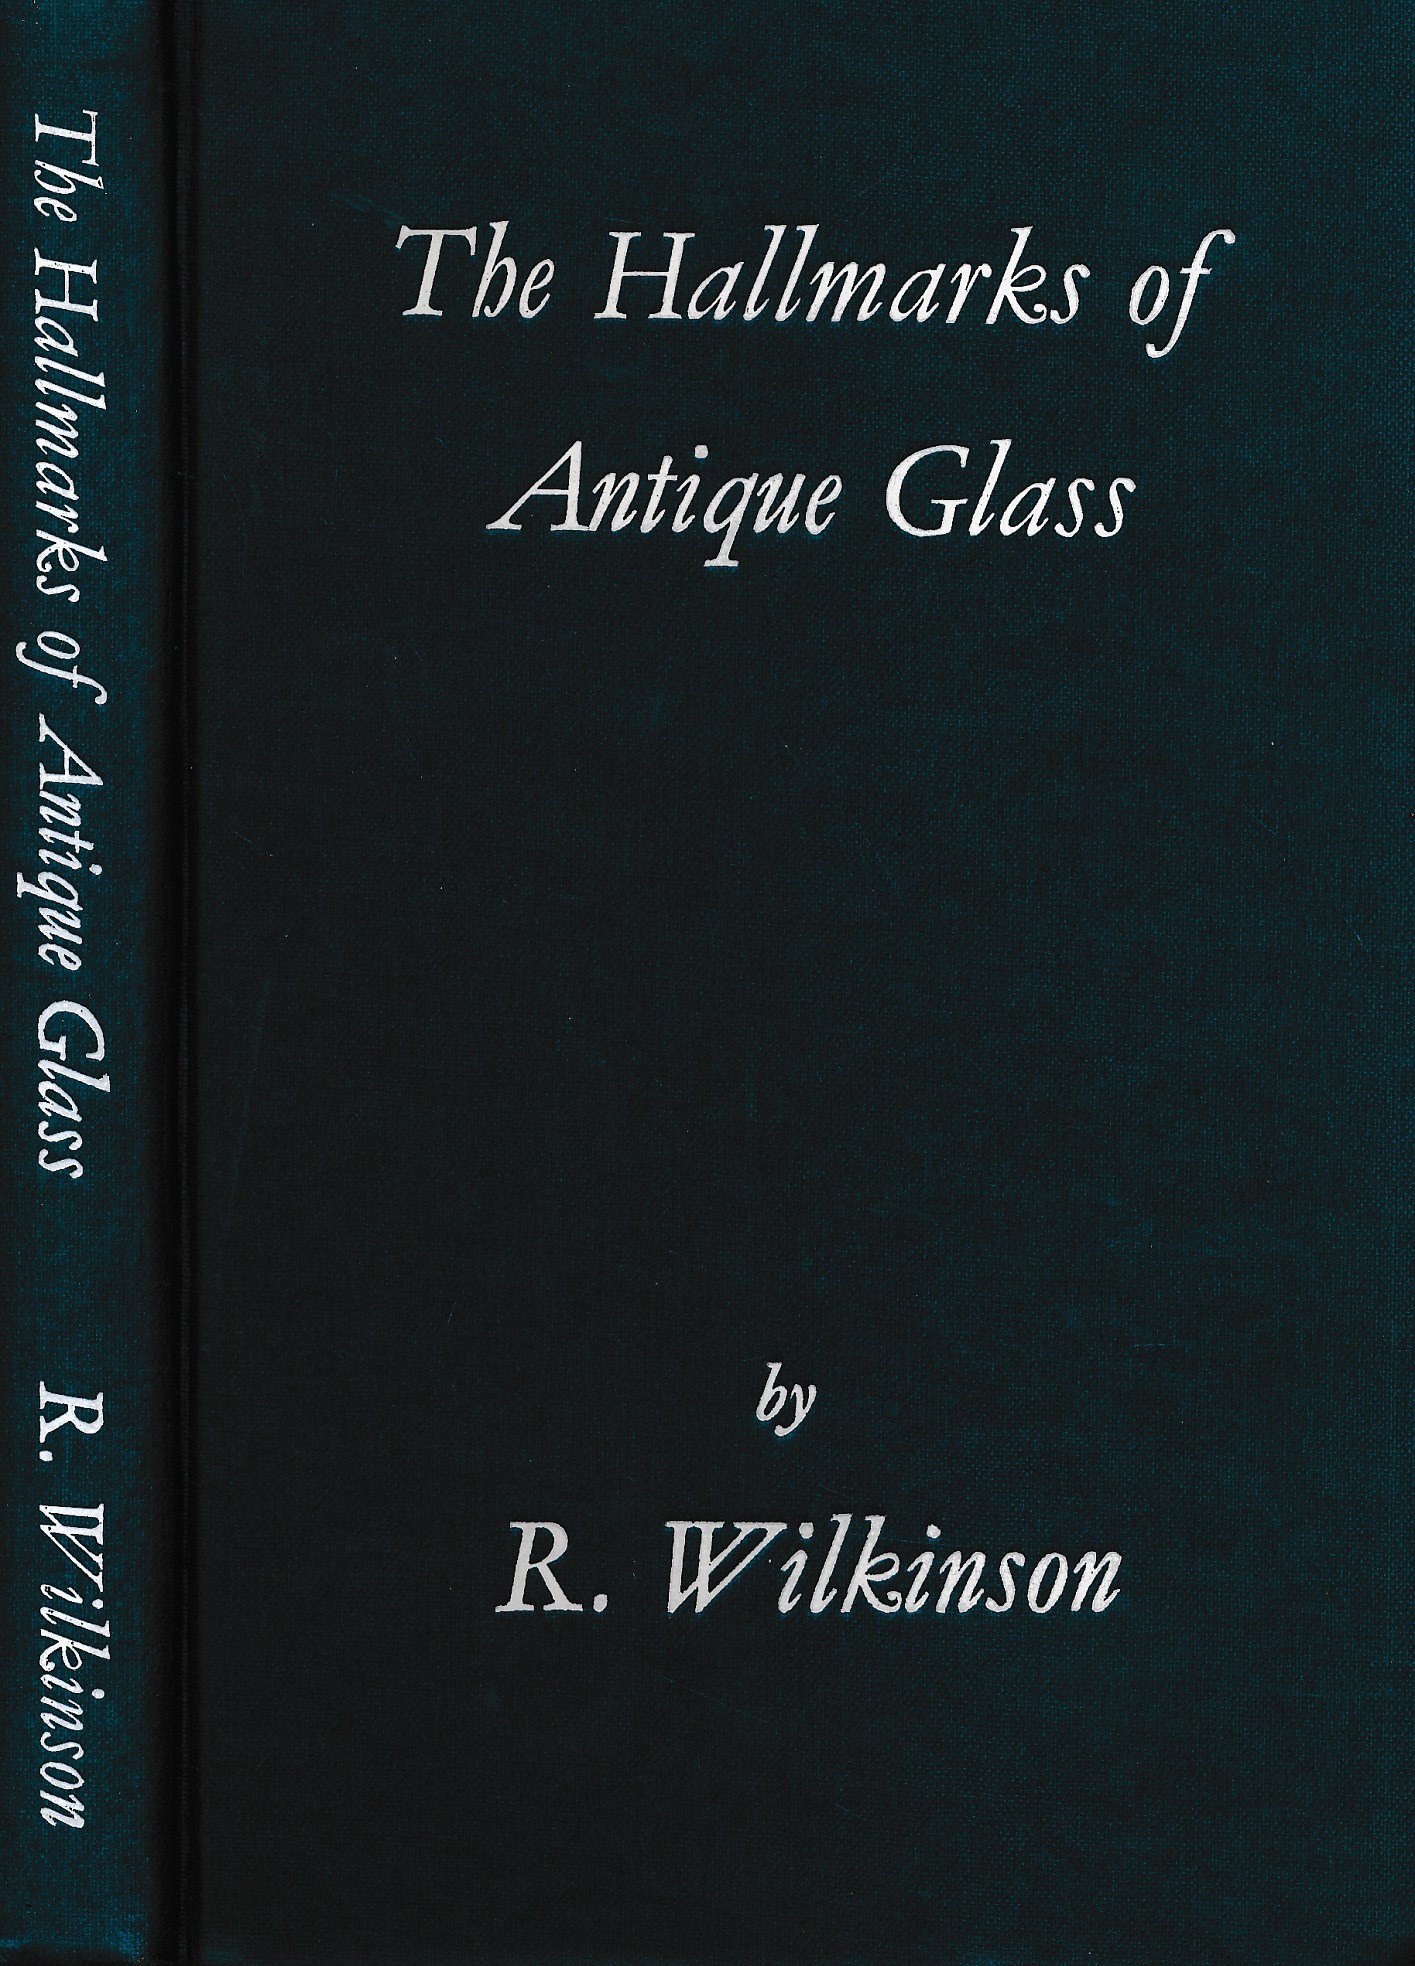 The Hallmarks of Antique Glass. Signed copy.